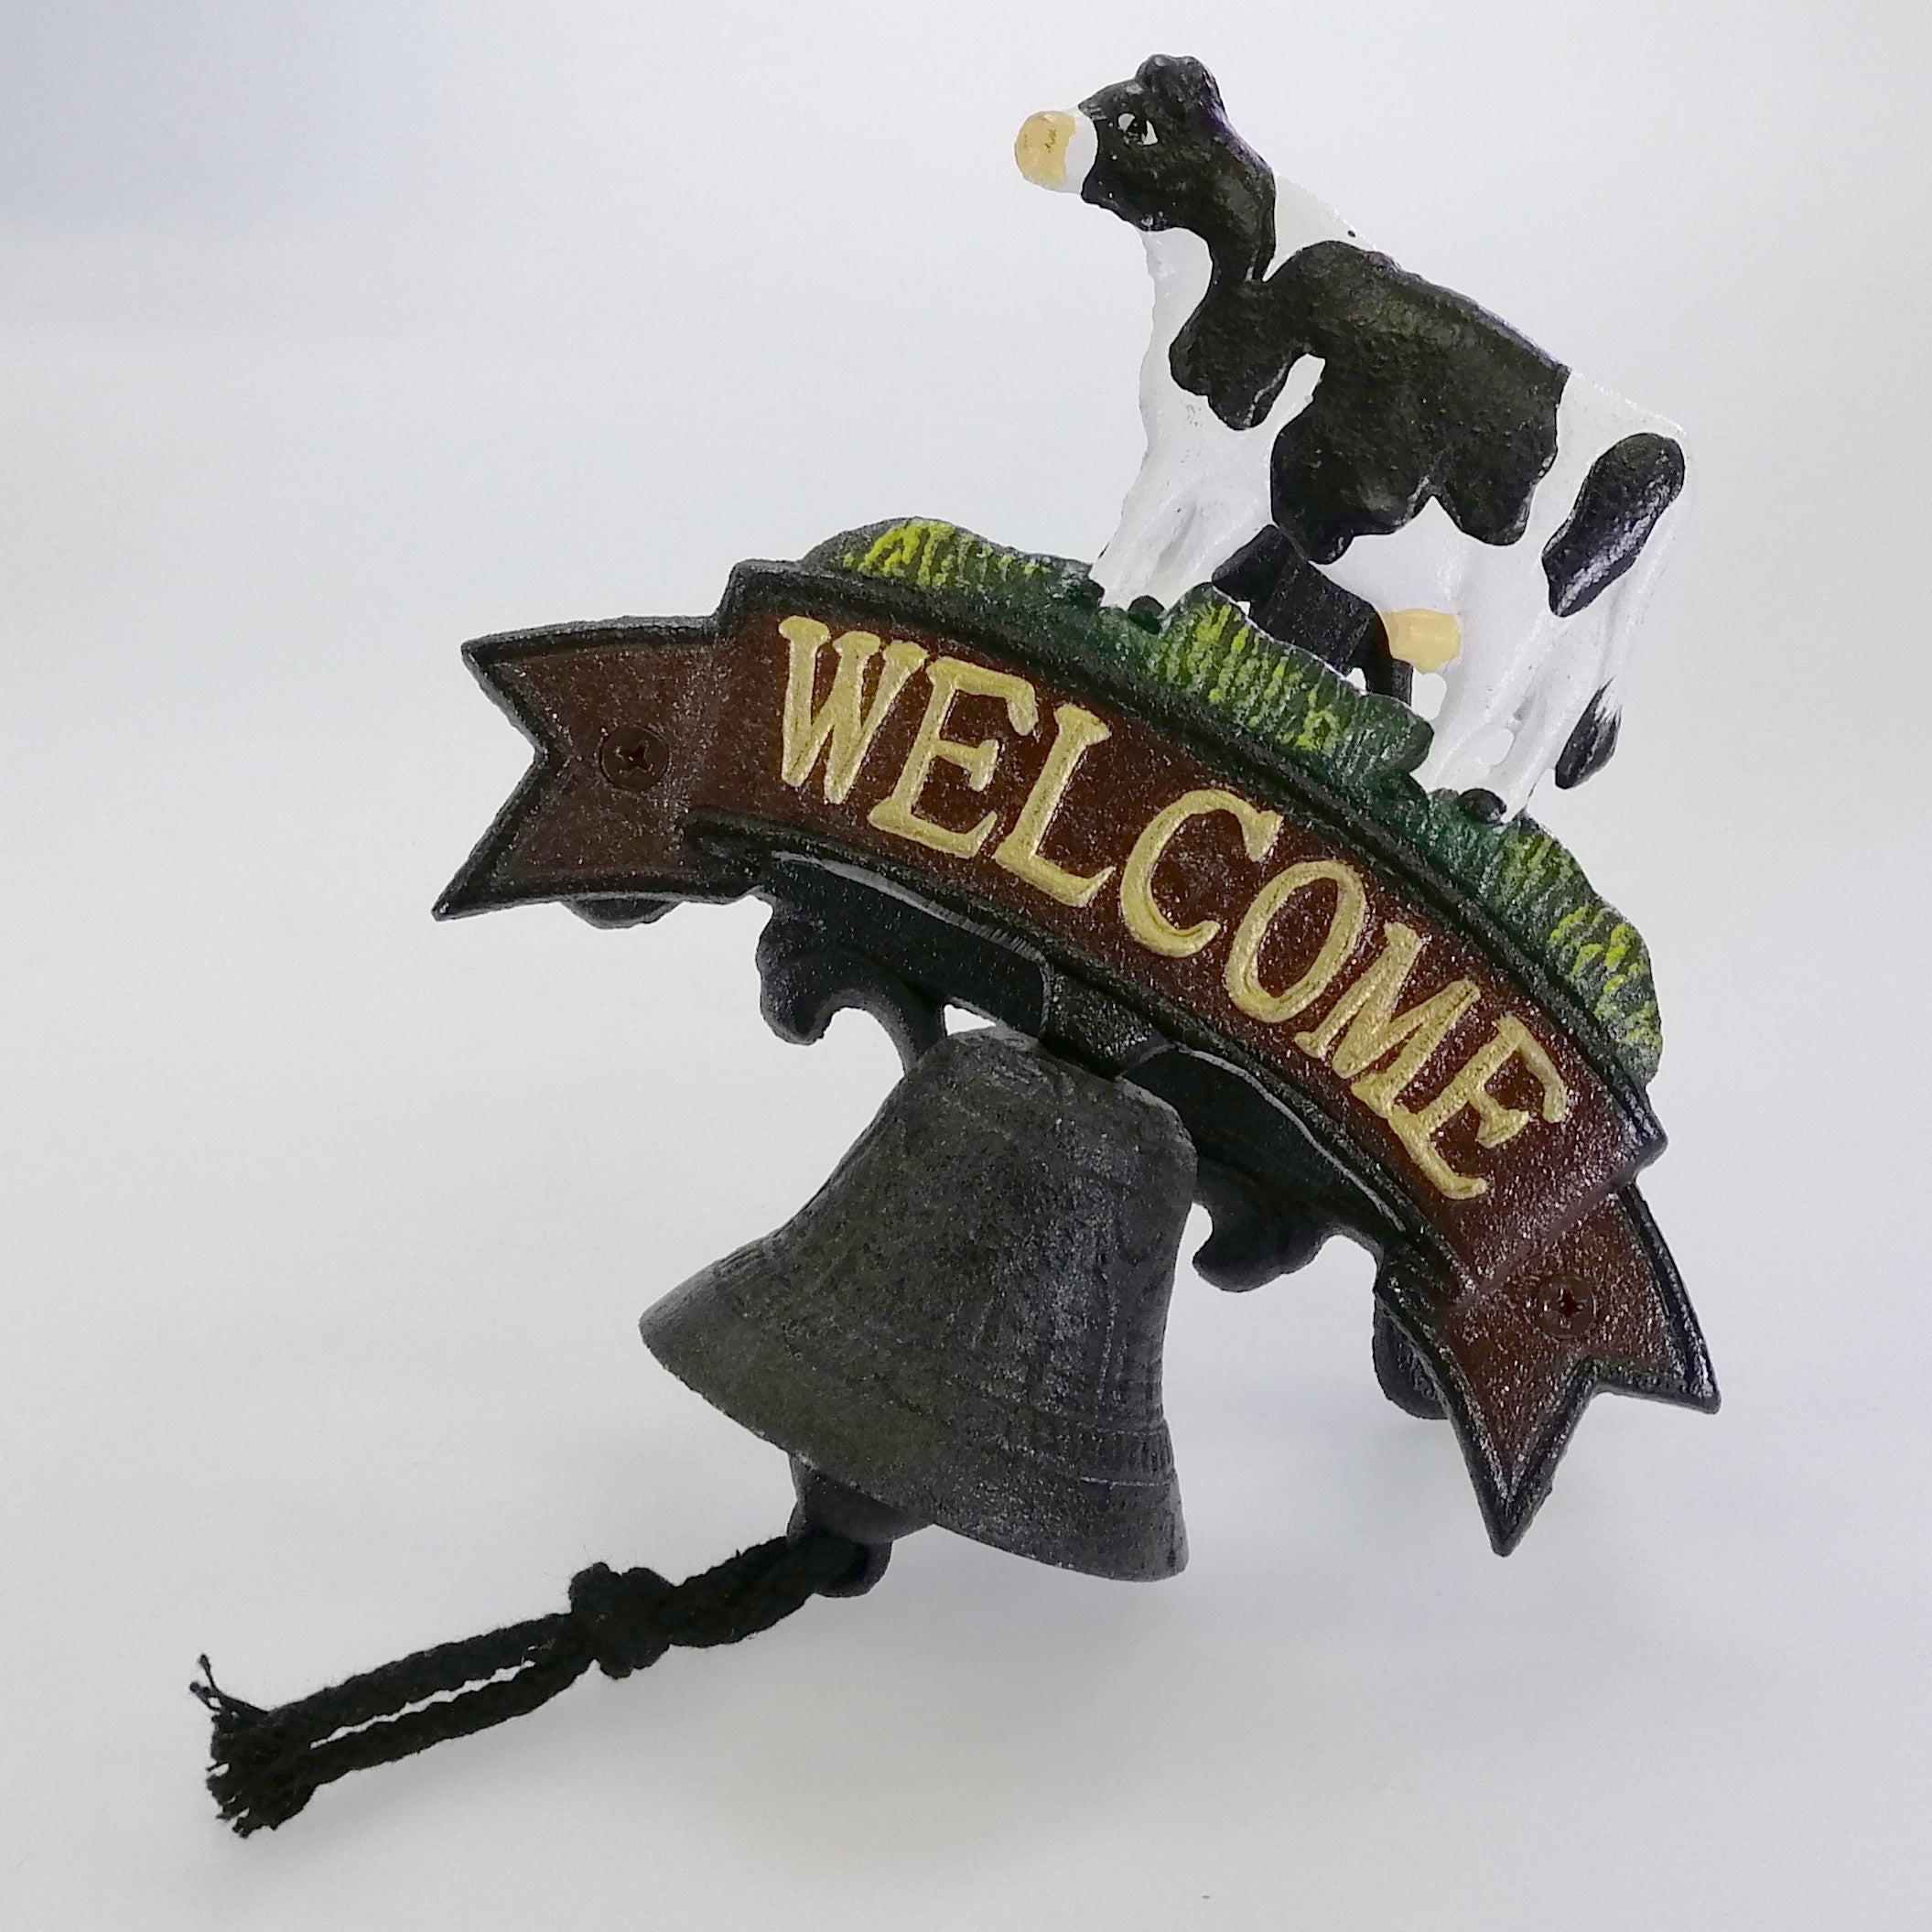 Cast Iron Welcome Bell - Cow